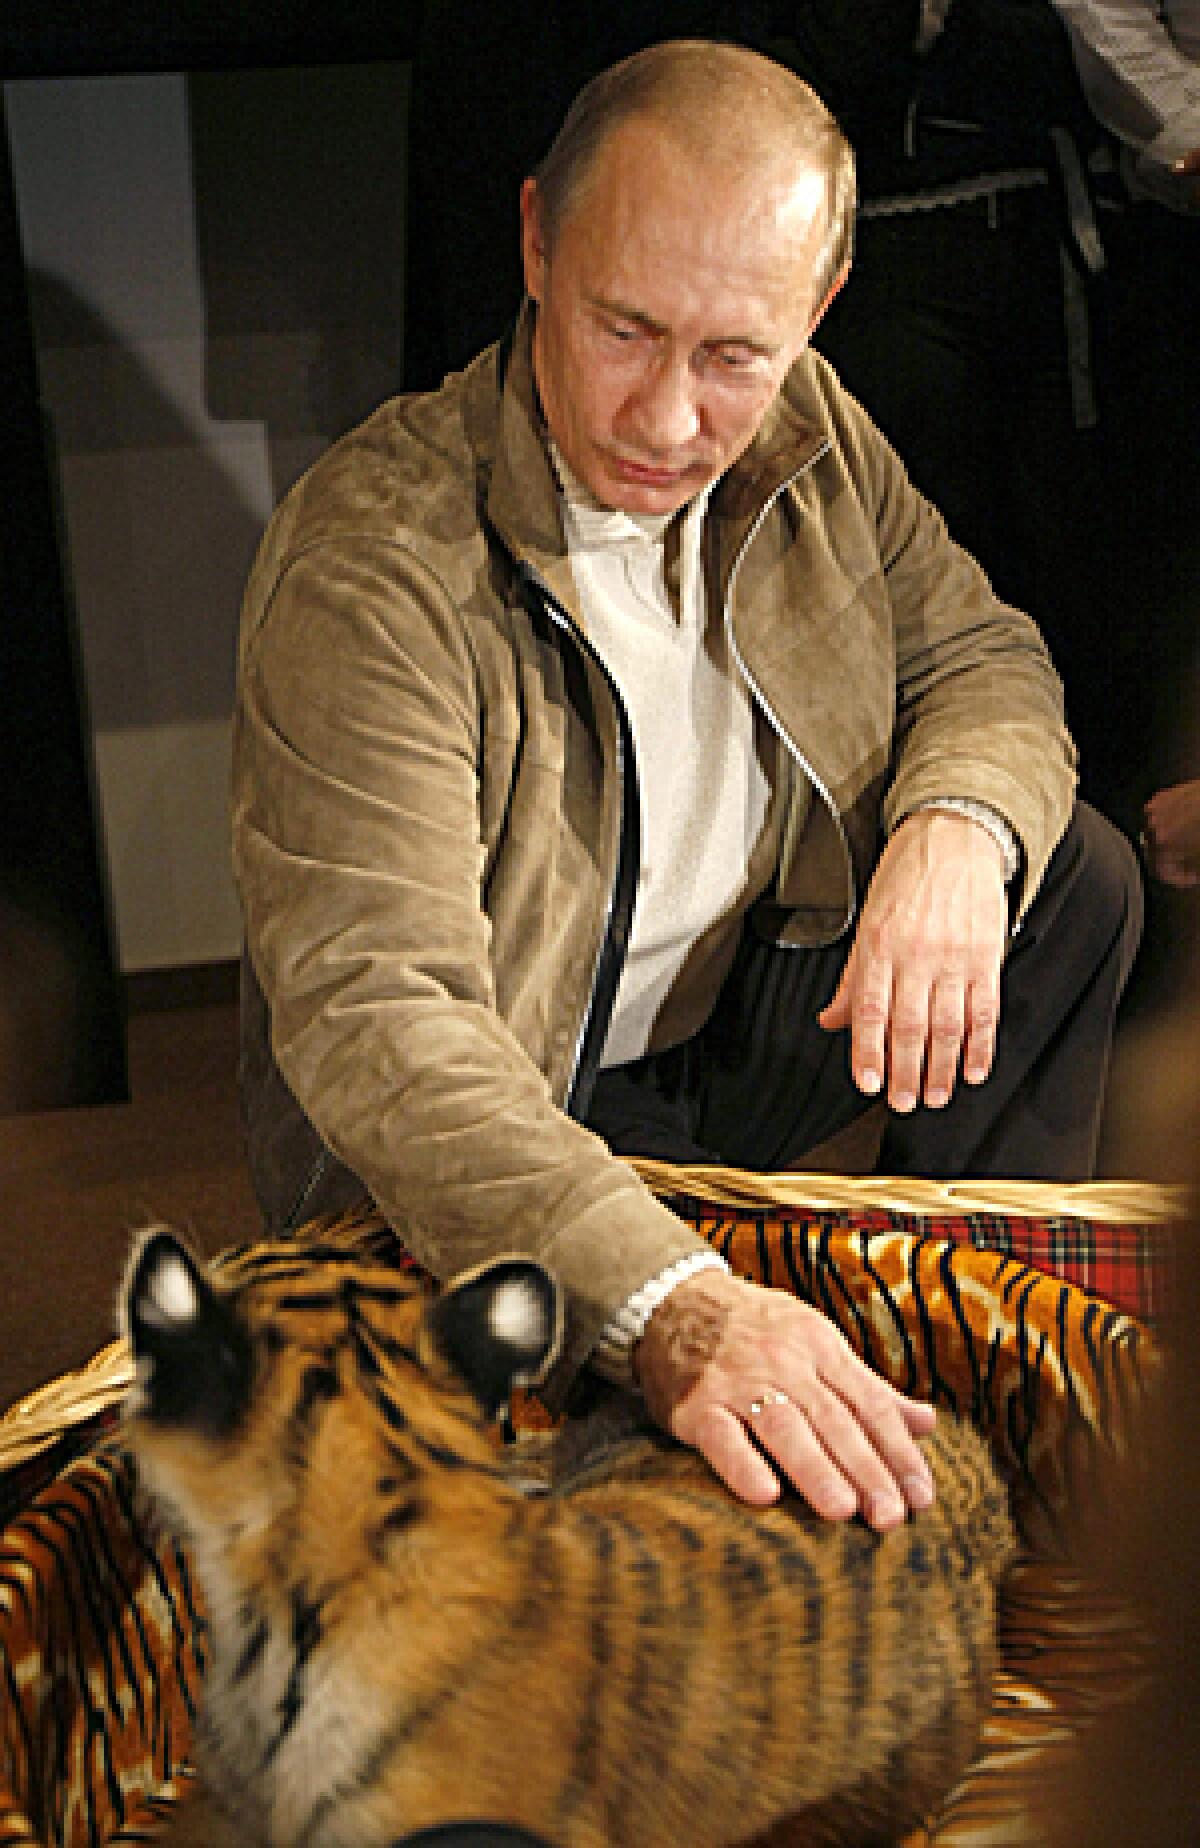 Russian Prime Minister Vladimir Putin caresses a tiger cub on October 10, 2008 which was presented to him on his bithday on October 7, in Novo-Ogaryovo residence outside Moscow.